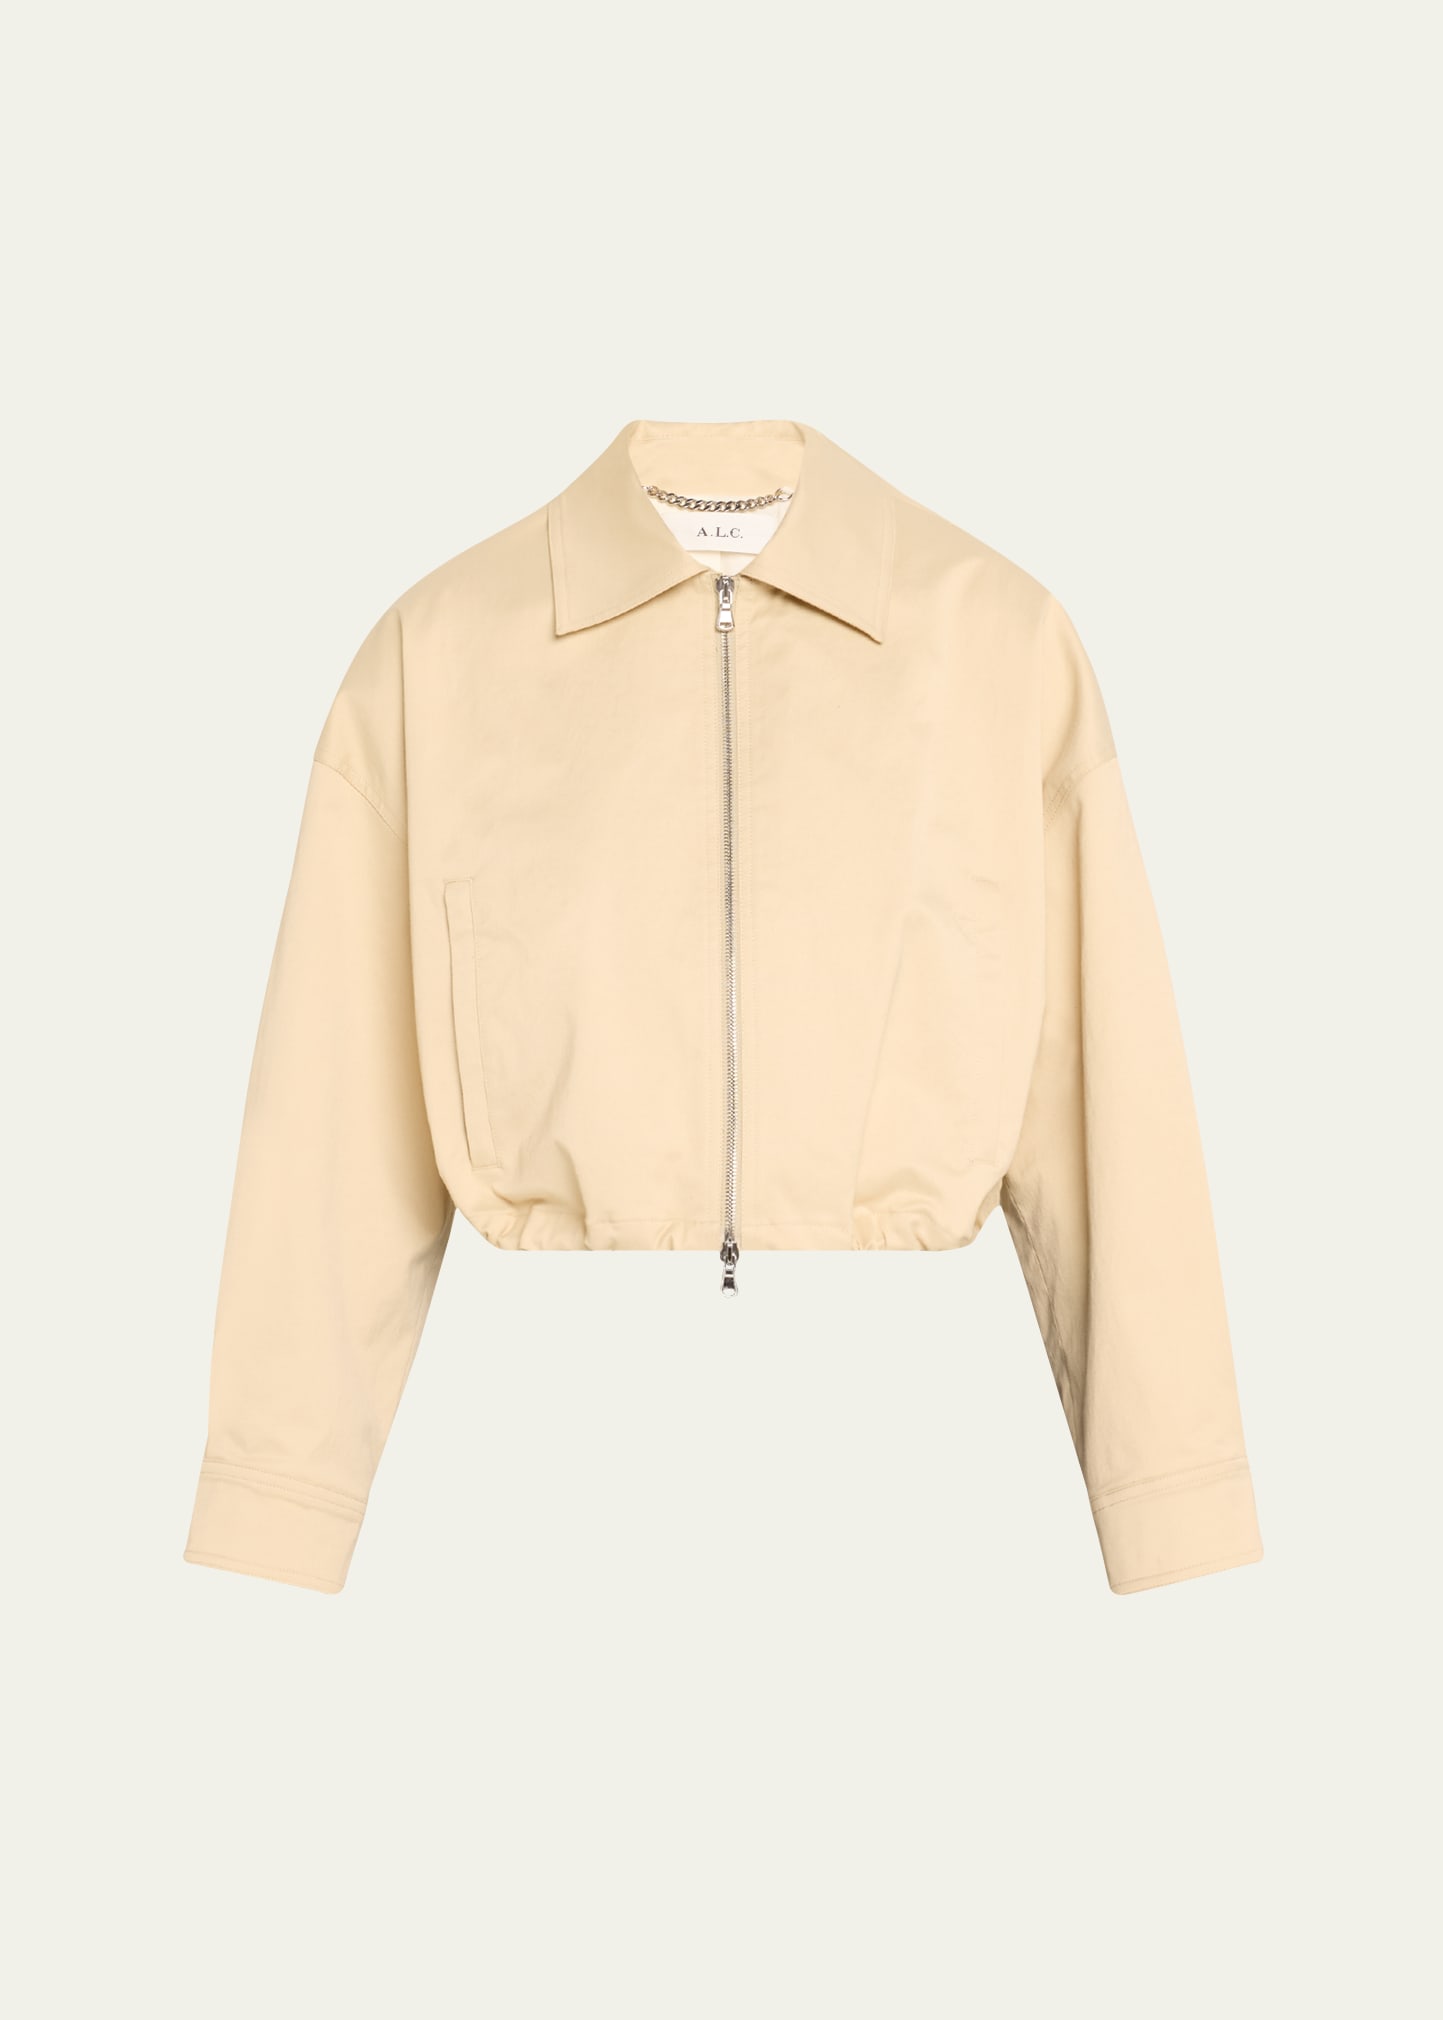 A.l.c Harry Jacket In Neutral